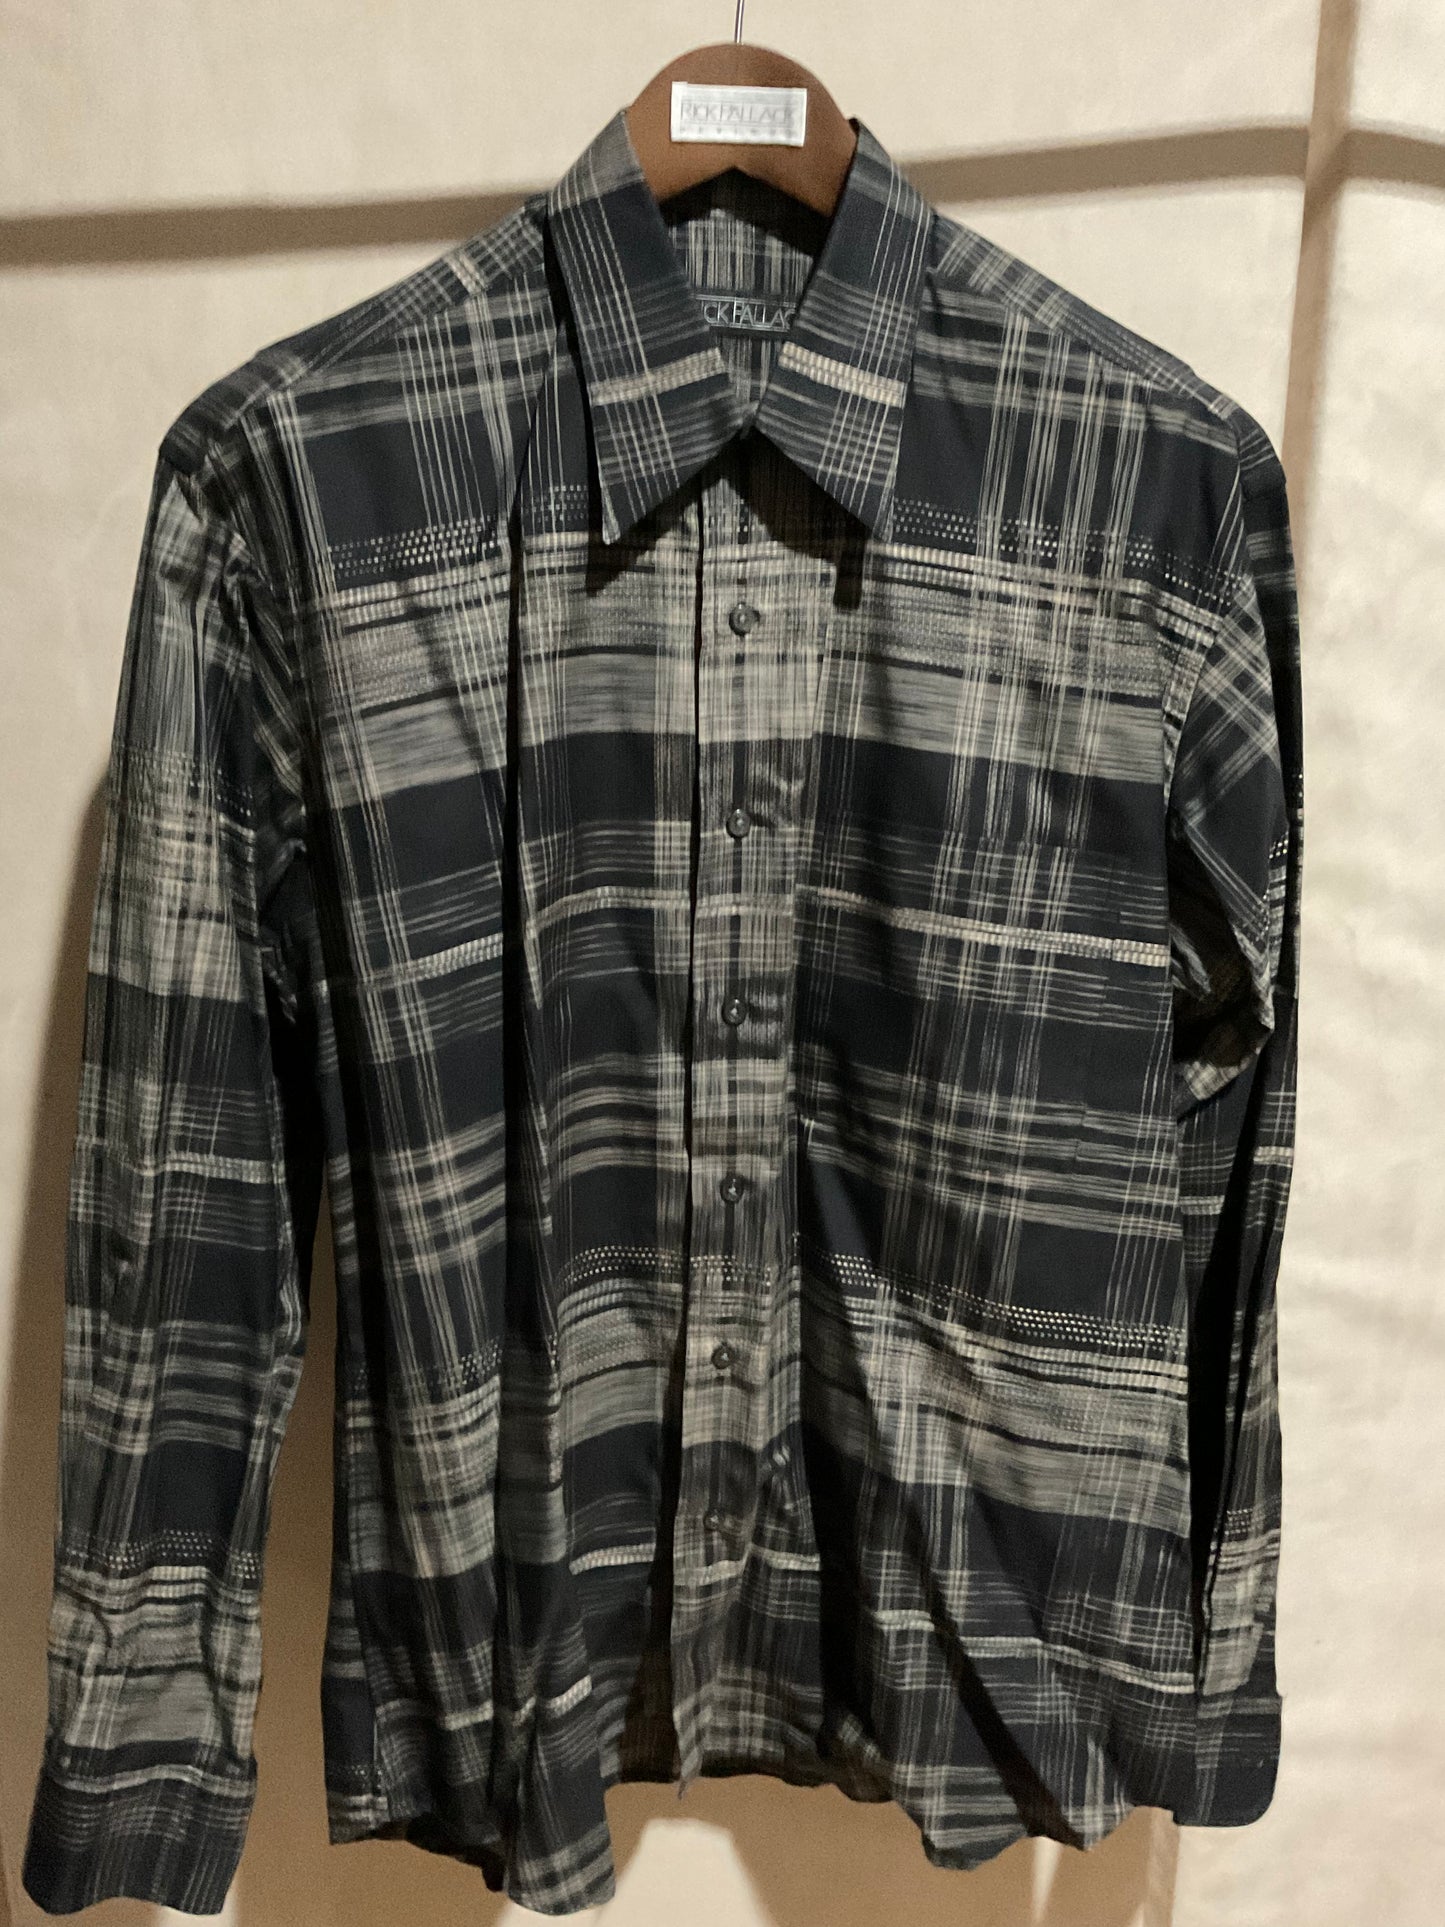 R P SPORT SHIRT / 100% COTTON / NEW / MEDIUM - LARGE / MADE IN USA